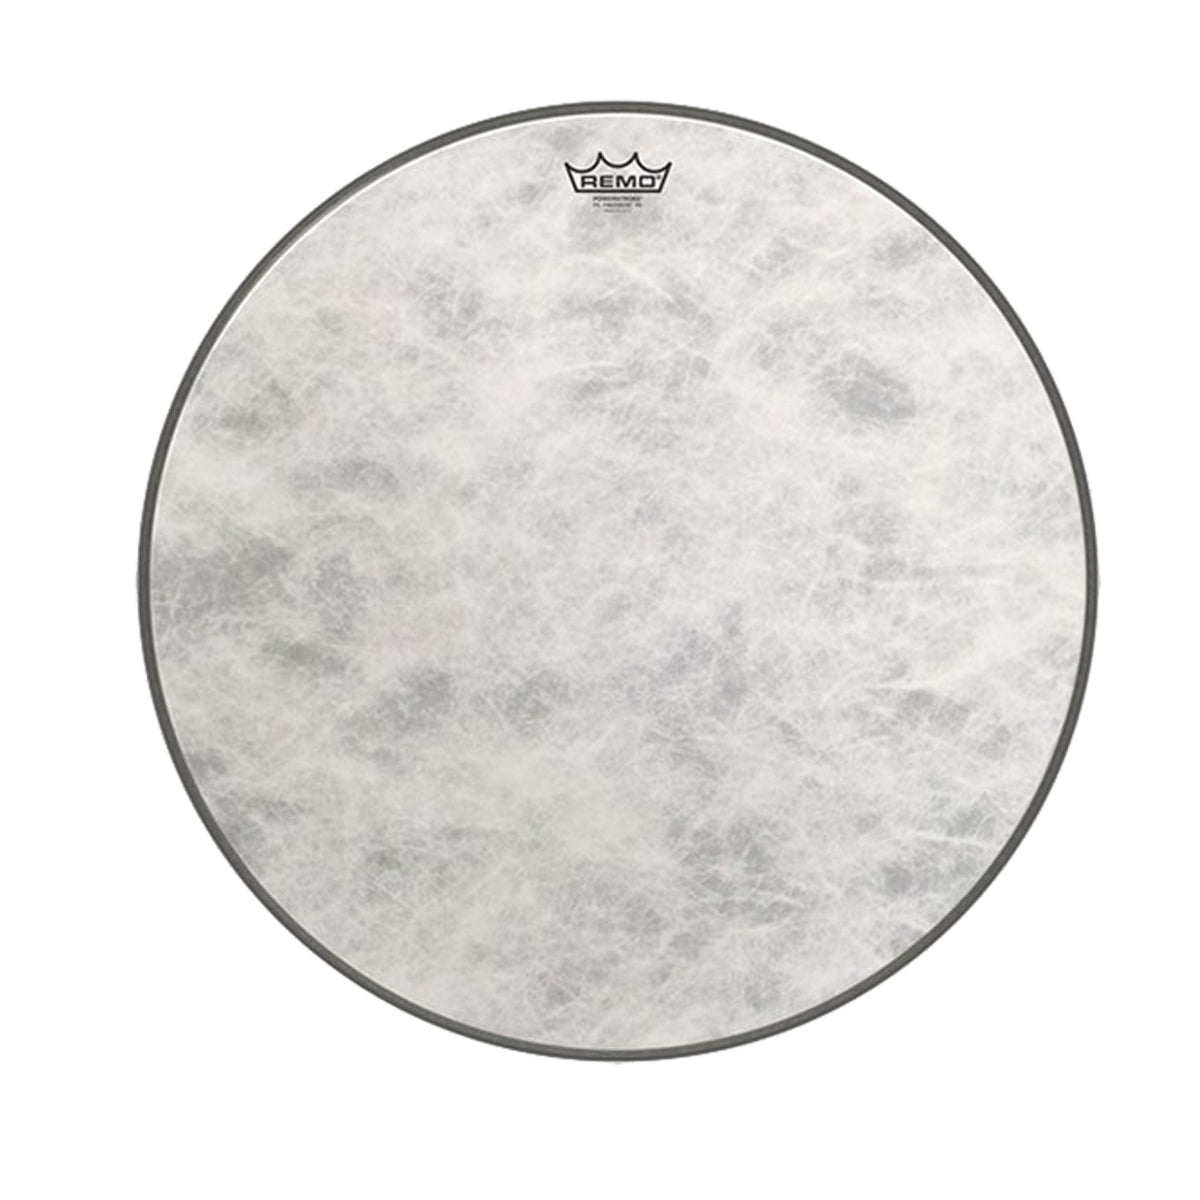 Remo P4-1318-C2 18inch Powerstroke 4 Clear Bass Drum Head Skin